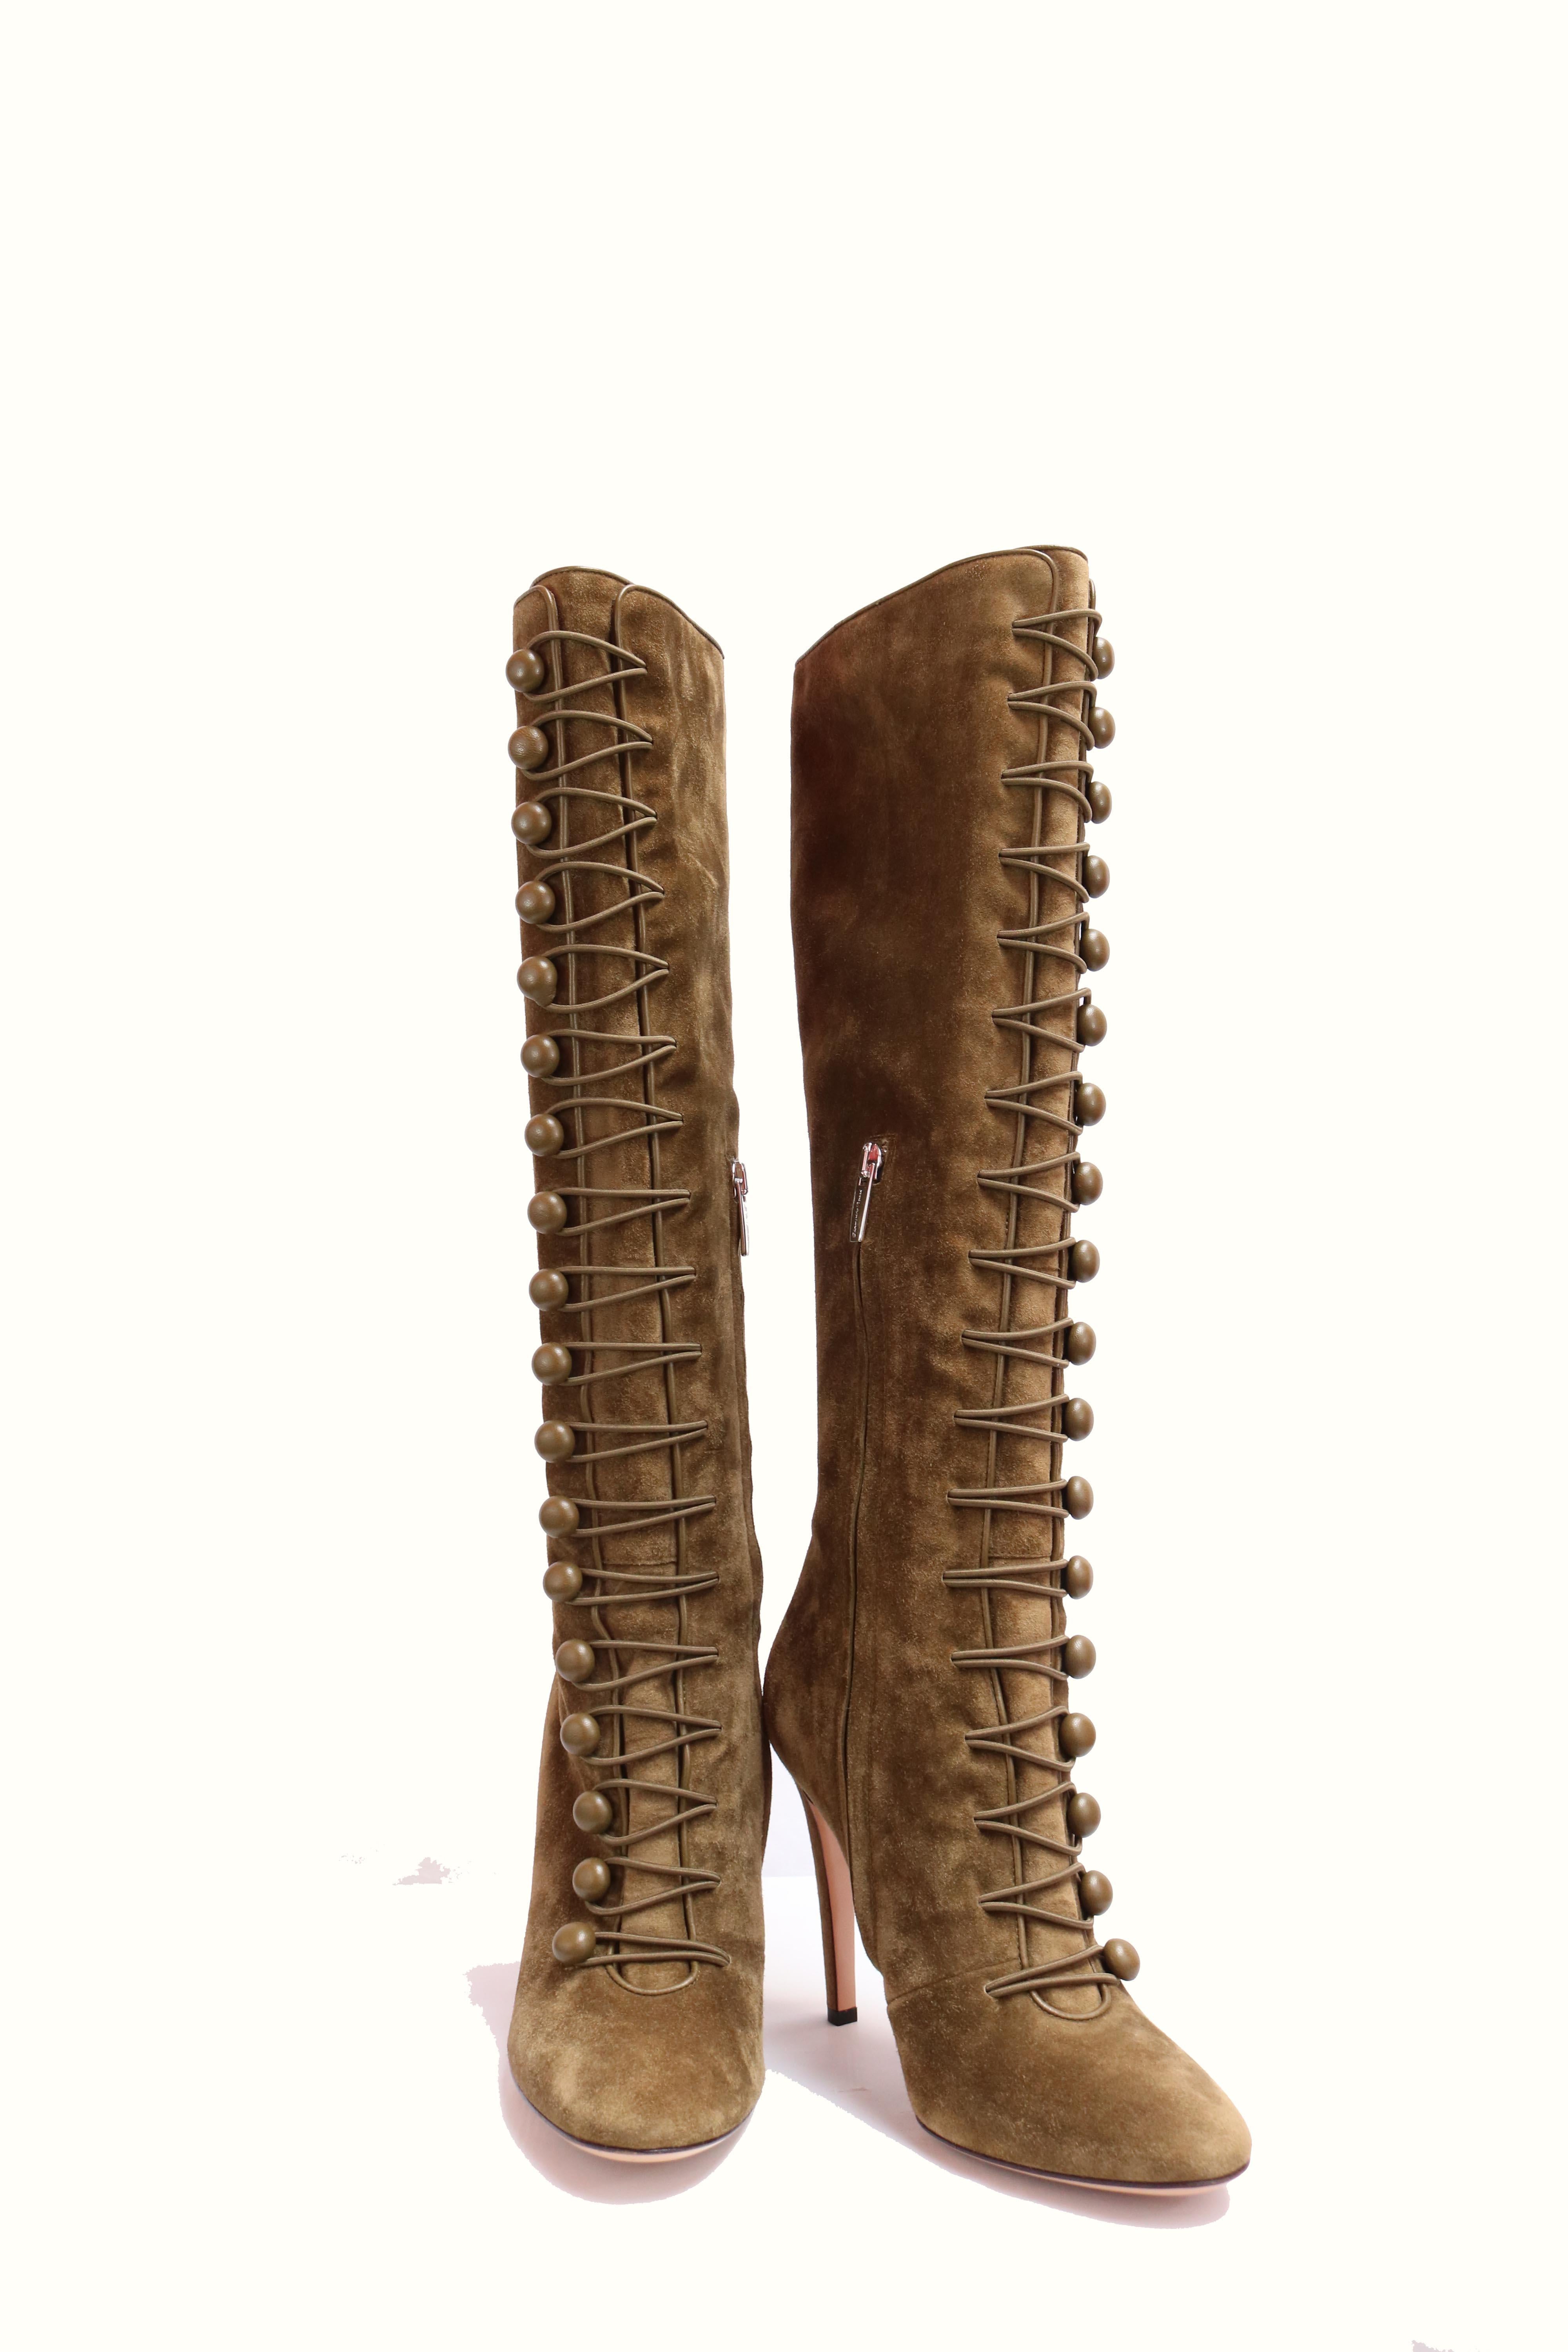 Gianvito Rossi Knee-High Boots  1